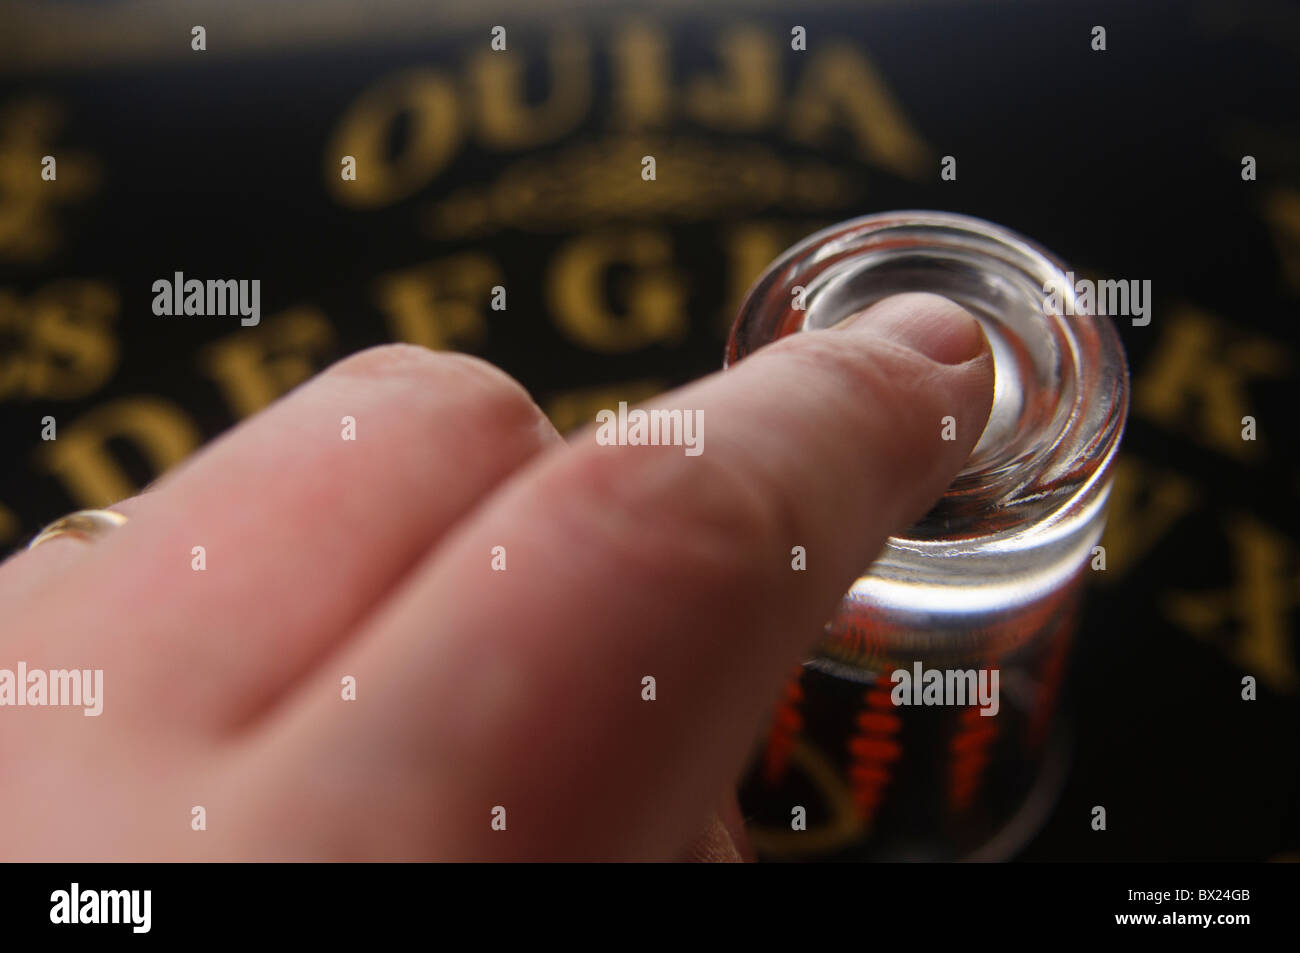 Finger on top of a glass on a Ouija board Stock Photo